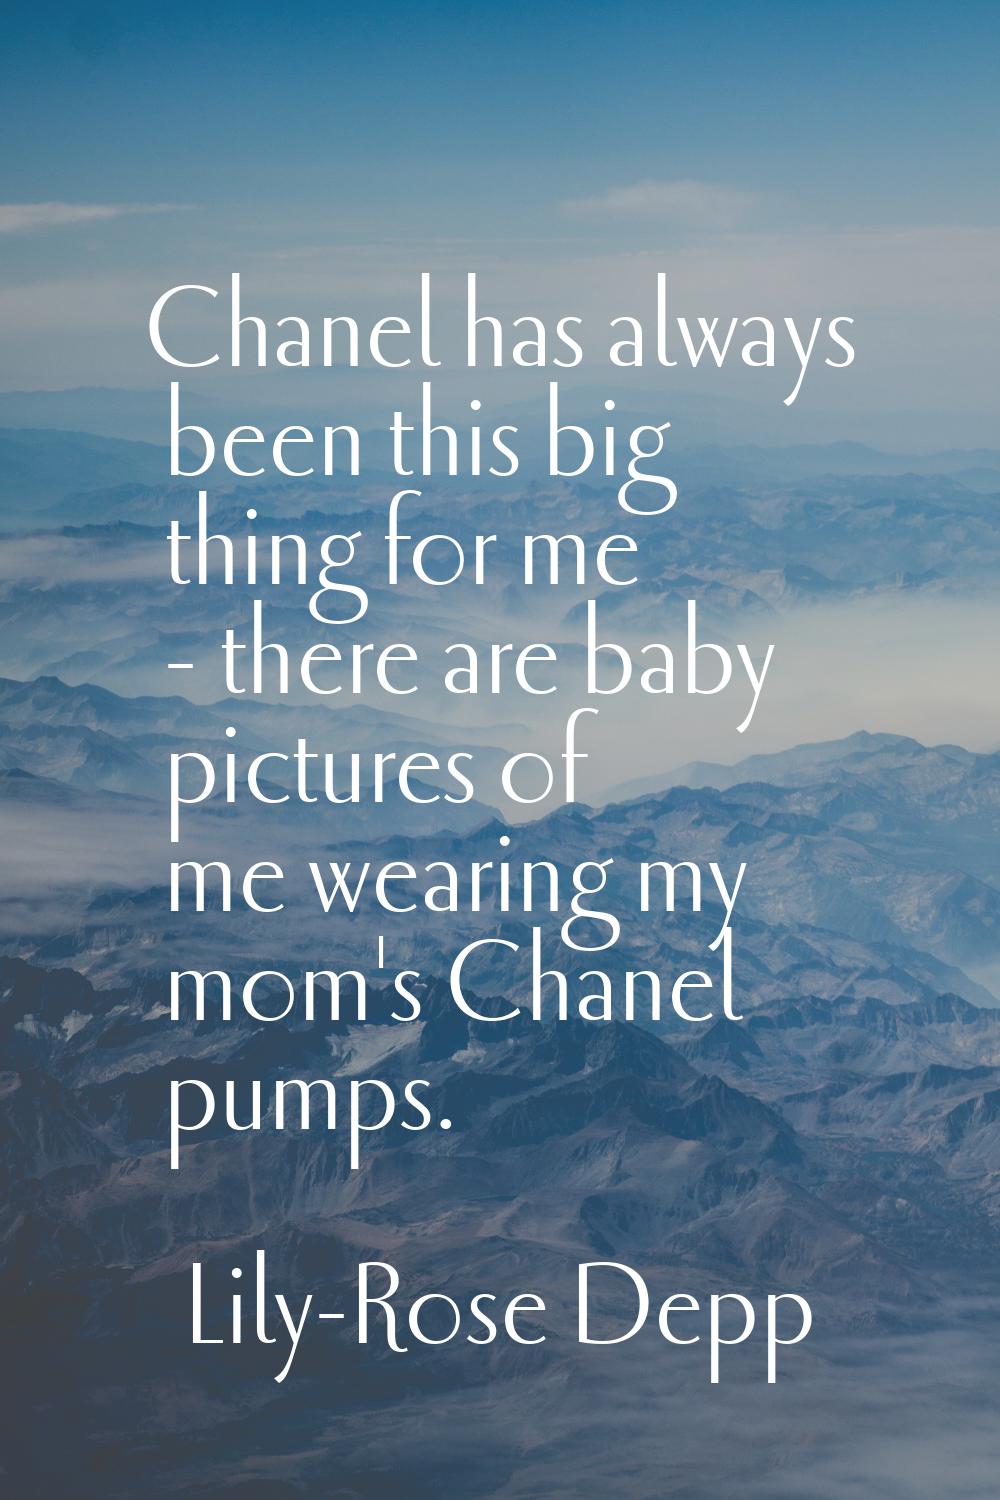 Chanel has always been this big thing for me - there are baby pictures of me wearing my mom's Chane